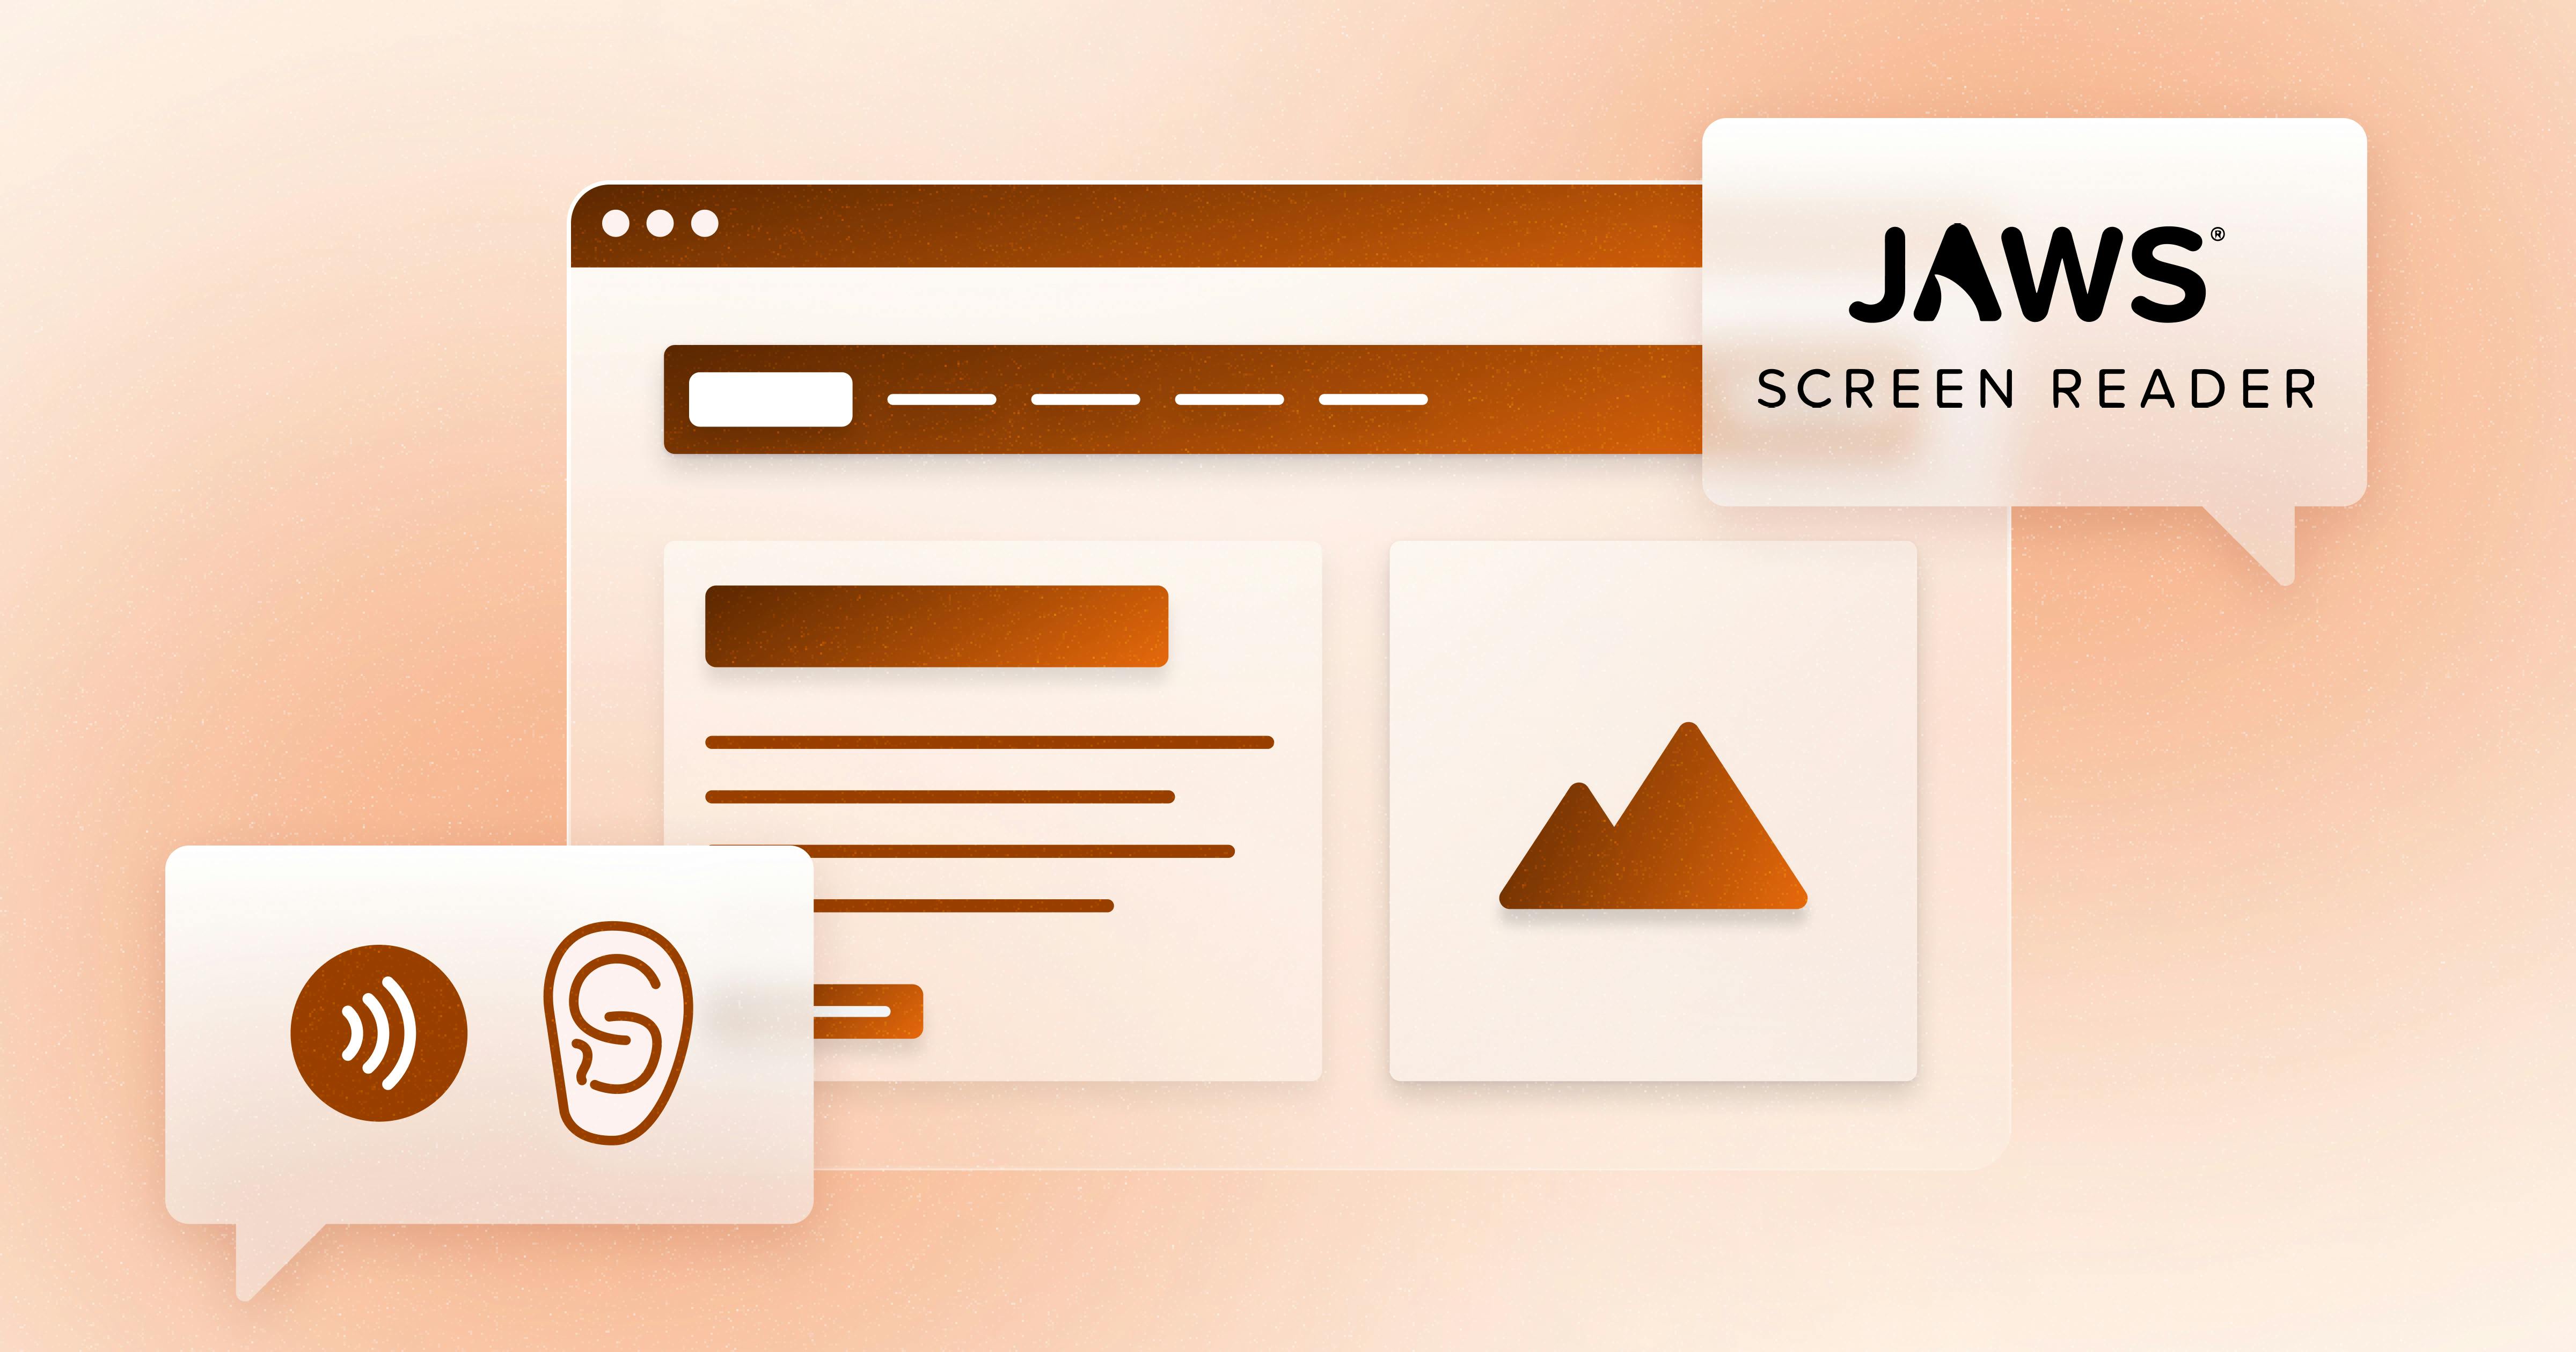 A stylized web browser, next to a logo for the JAWS screen reader and audio icons.